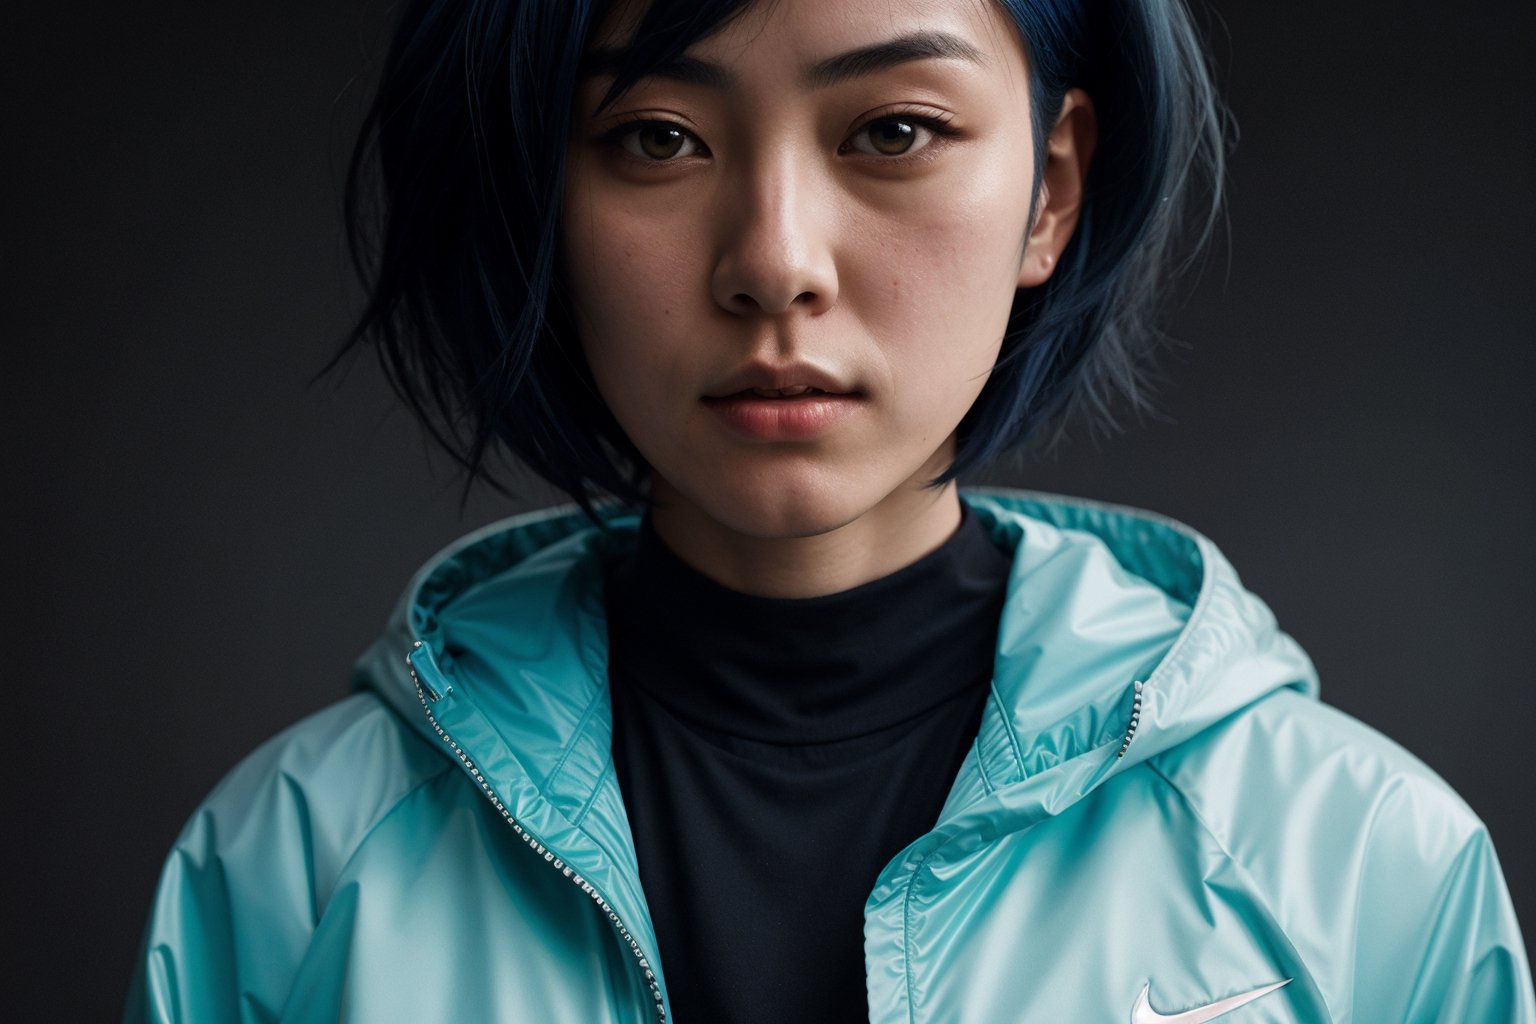 large superimposed Japanese characters ::2 close-up portrait of a beautiful woman with short blue hair, wearing a plastic Nike jacket, in cyberpunk style, with a dark gray background style raw,Masterpiece